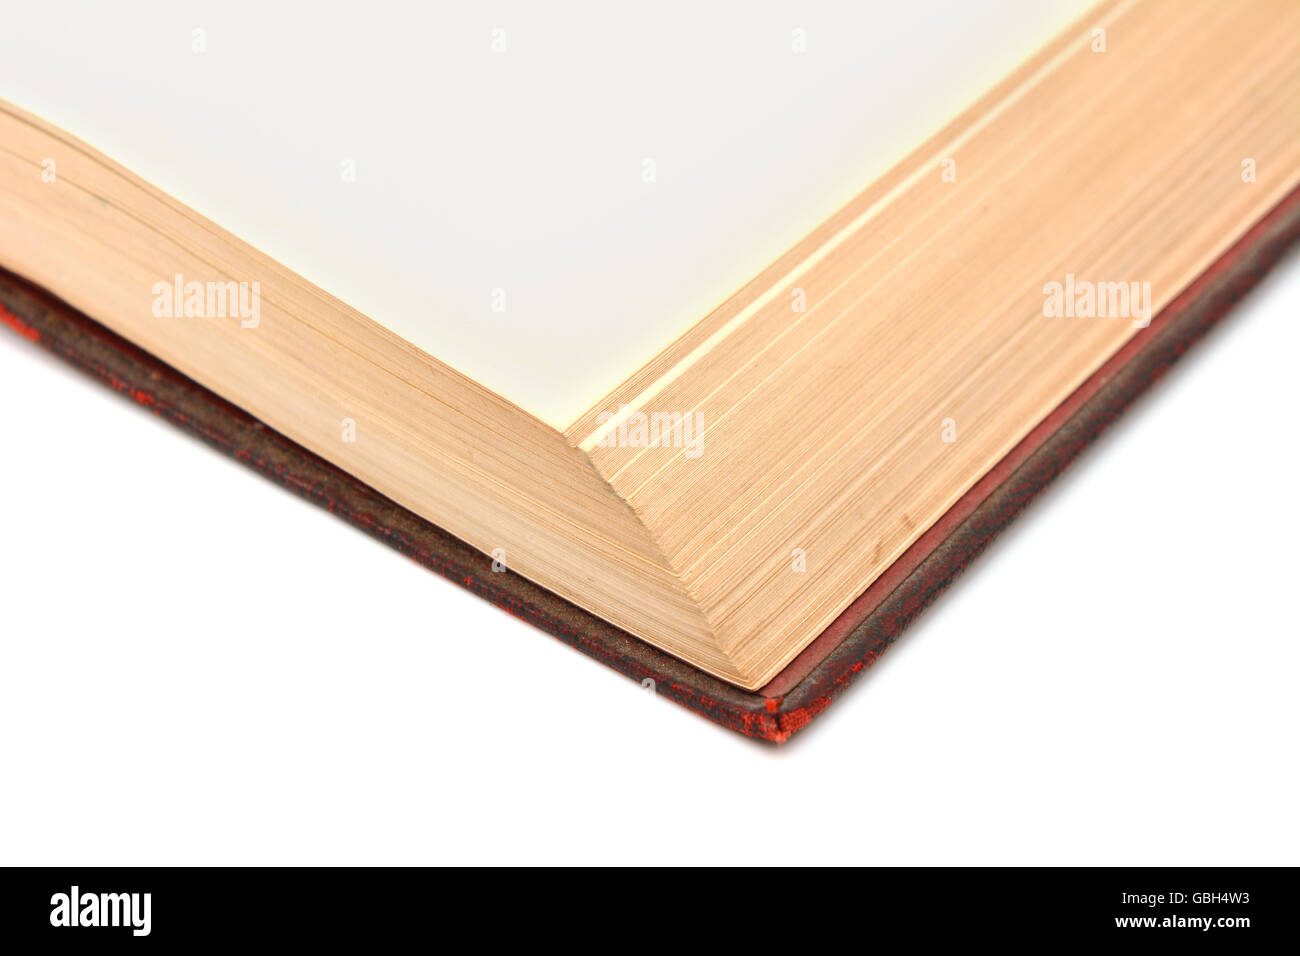 Corner detail of a blank page in a shabby, bound hardback book on a white background Stock Photo